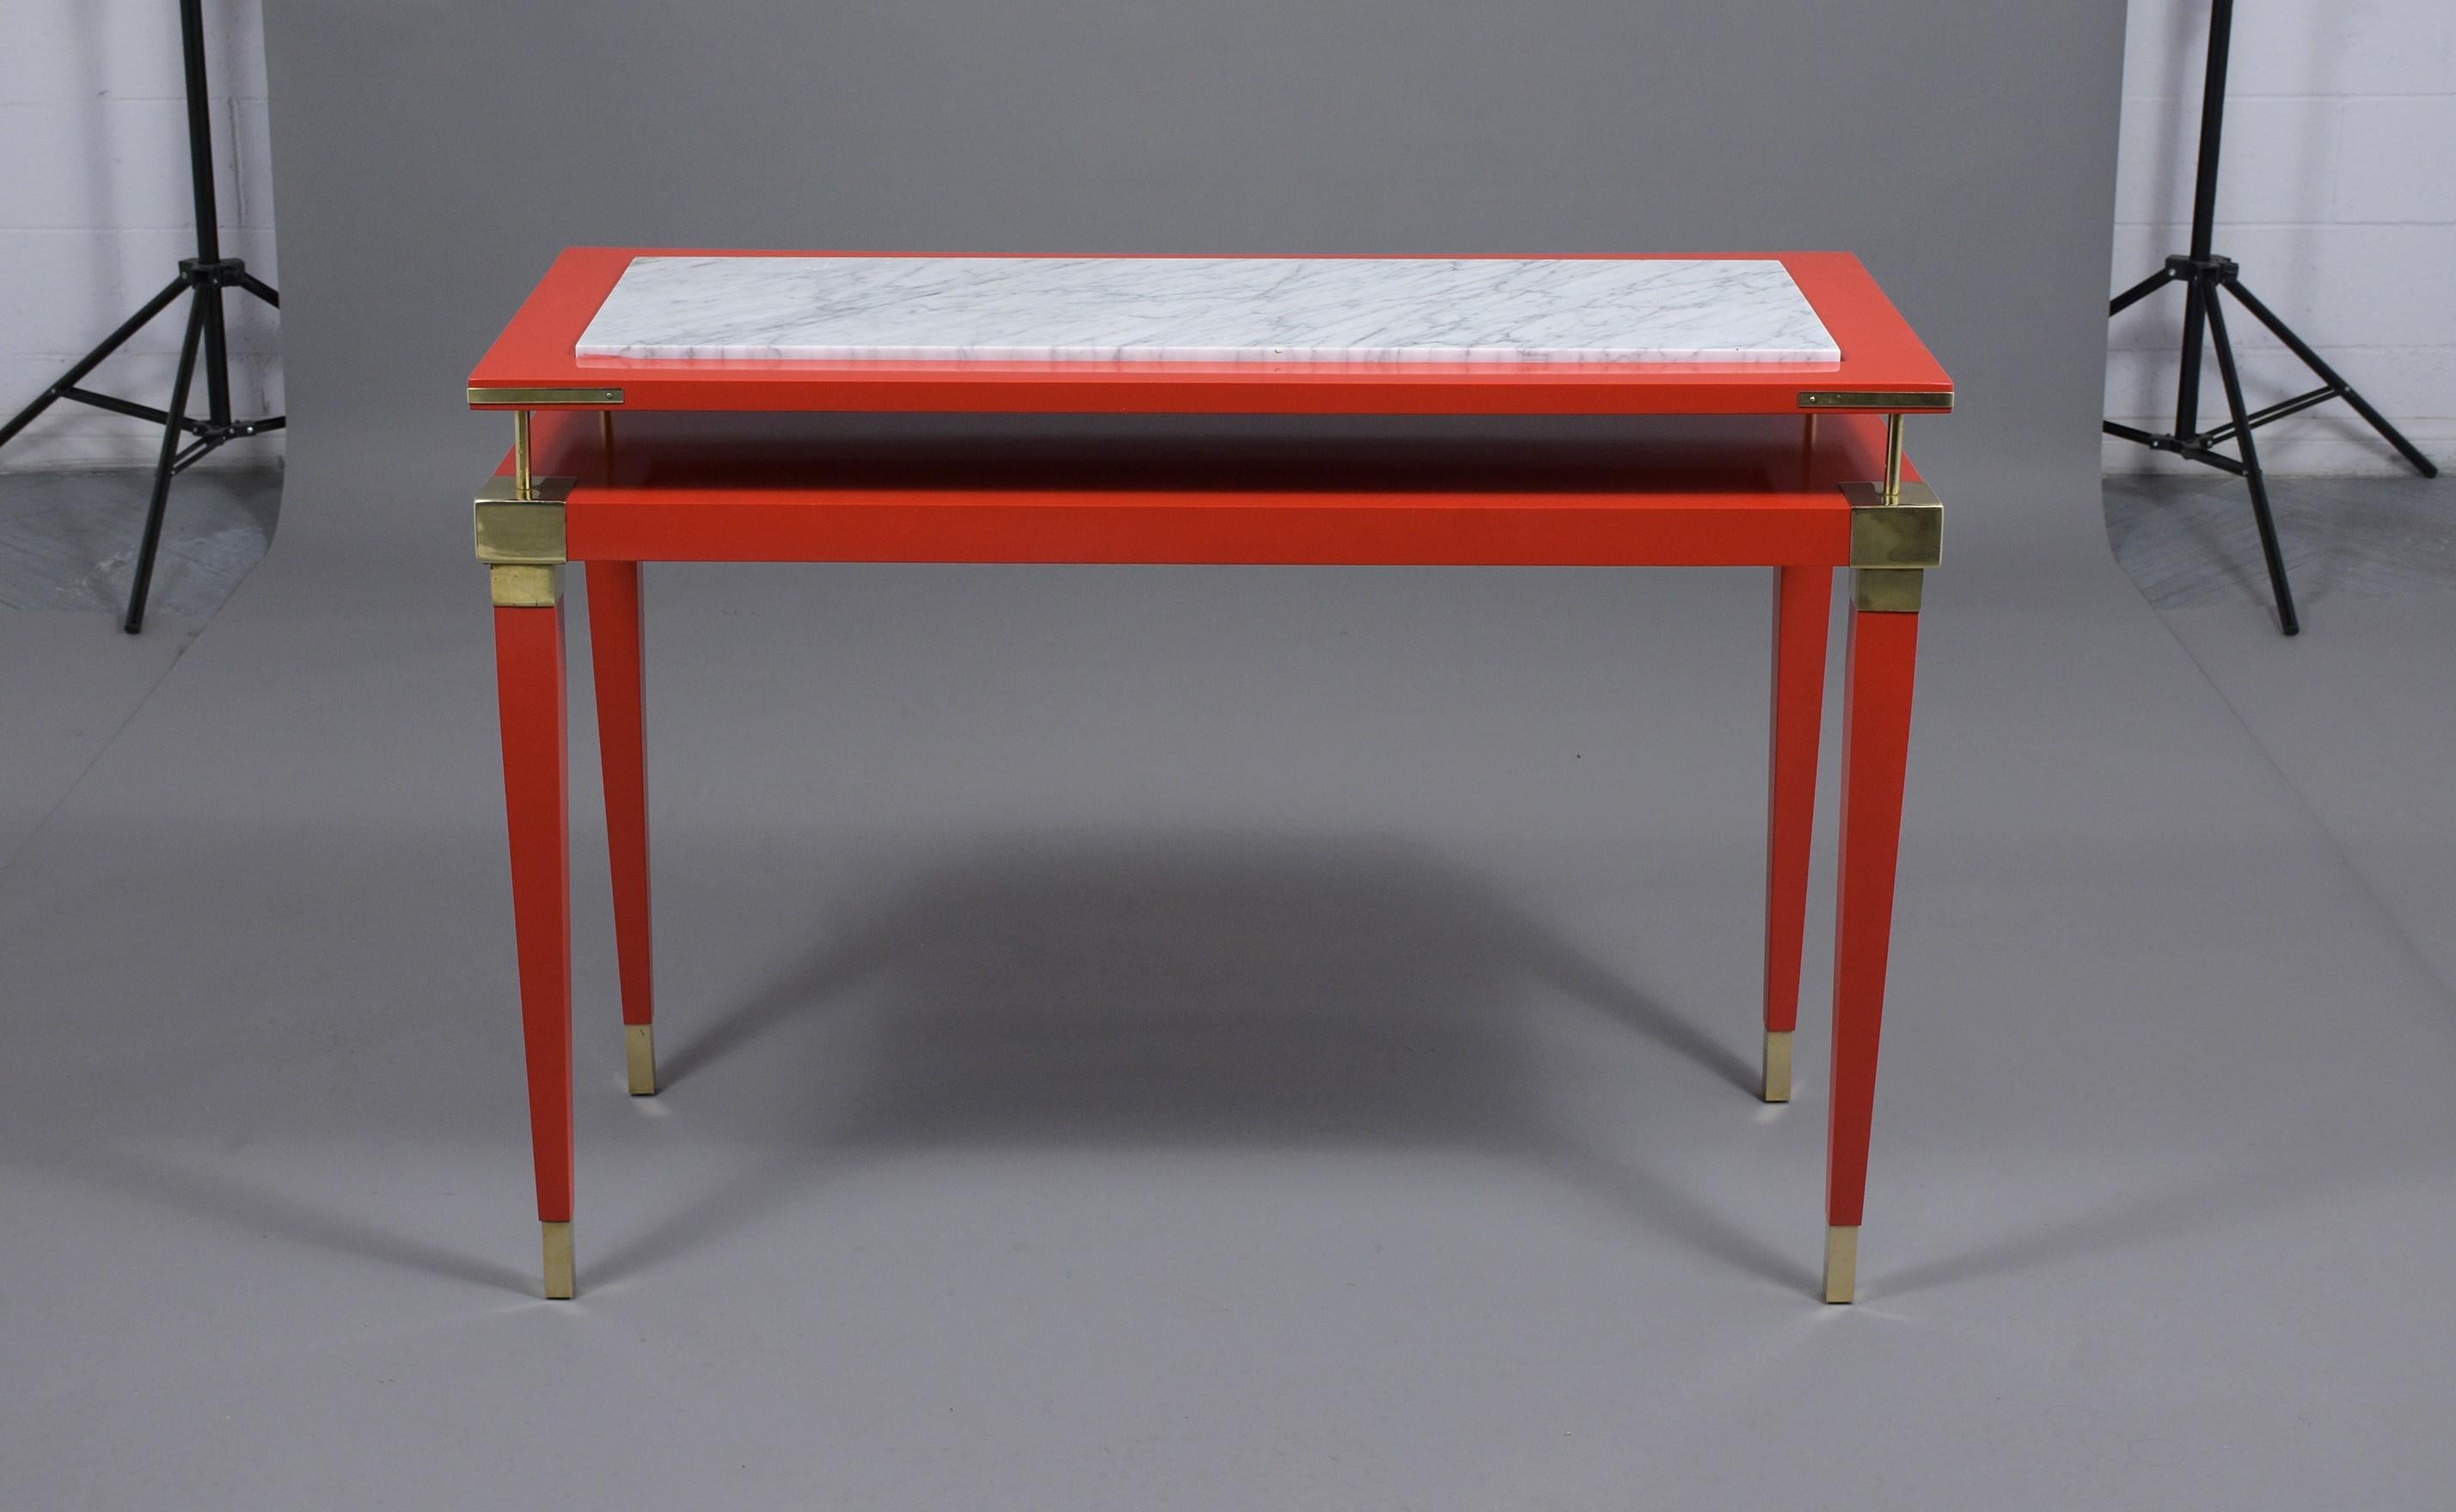 A 1970s vintage Maison Jansen style sofa table hand-crafted out of wood that features a beautiful red lacquered finish. This unique console has the tabletop floating above the base by simple, but sturdy brass poles, and the top of the table has a